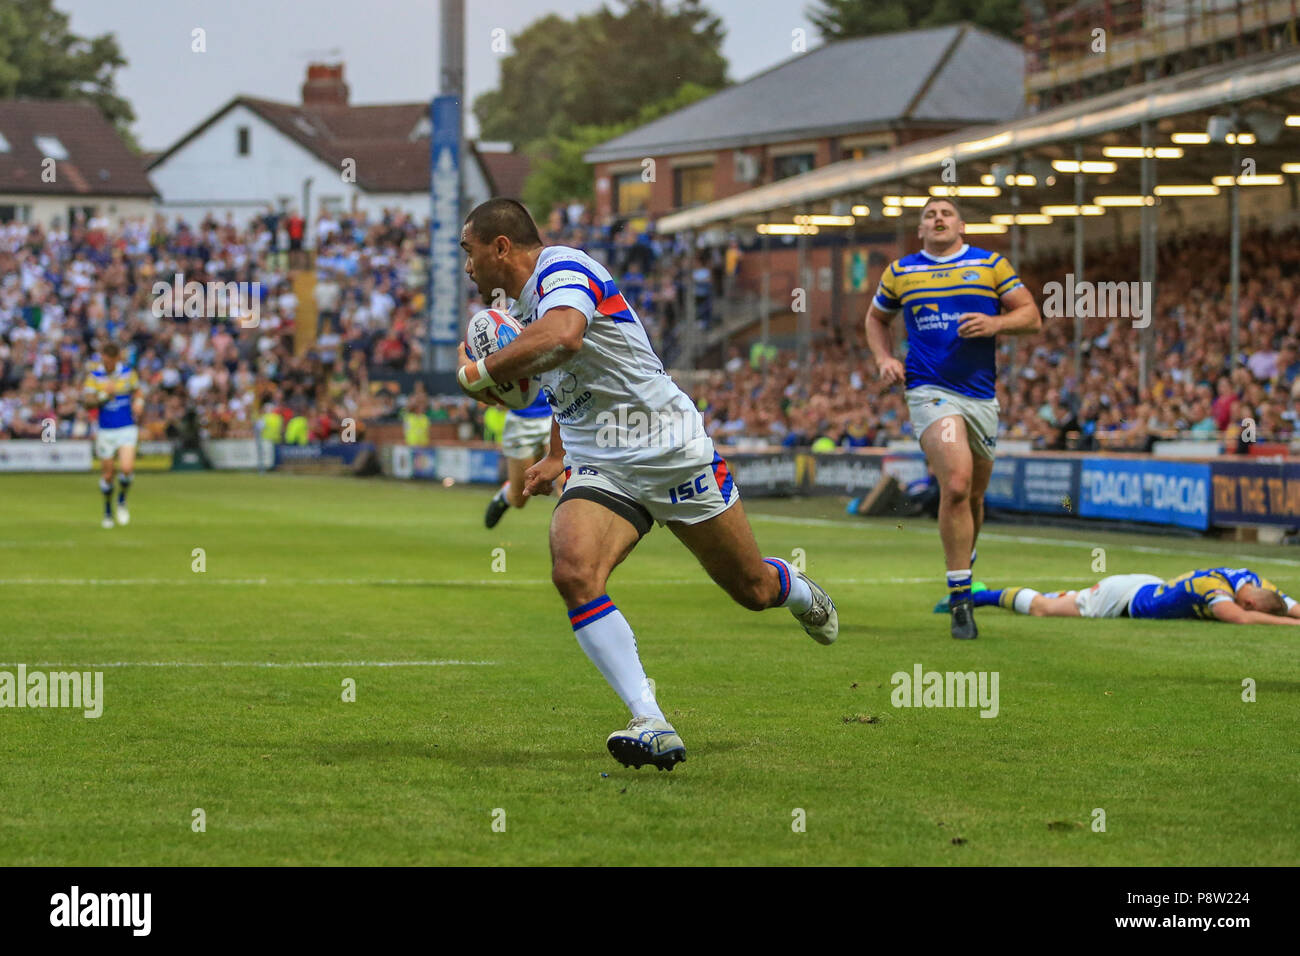 Friday 13th July 2018 , Emerald Headingley Stadium, Leeds, England; Betfred Super League, Leeds Rhinos v Wakefield Trinity; Bill Tupou of Wakefield Trinity makes a solo 50 yard dash to go over for a try Credit: News Images /Alamy Live News Stock Photo